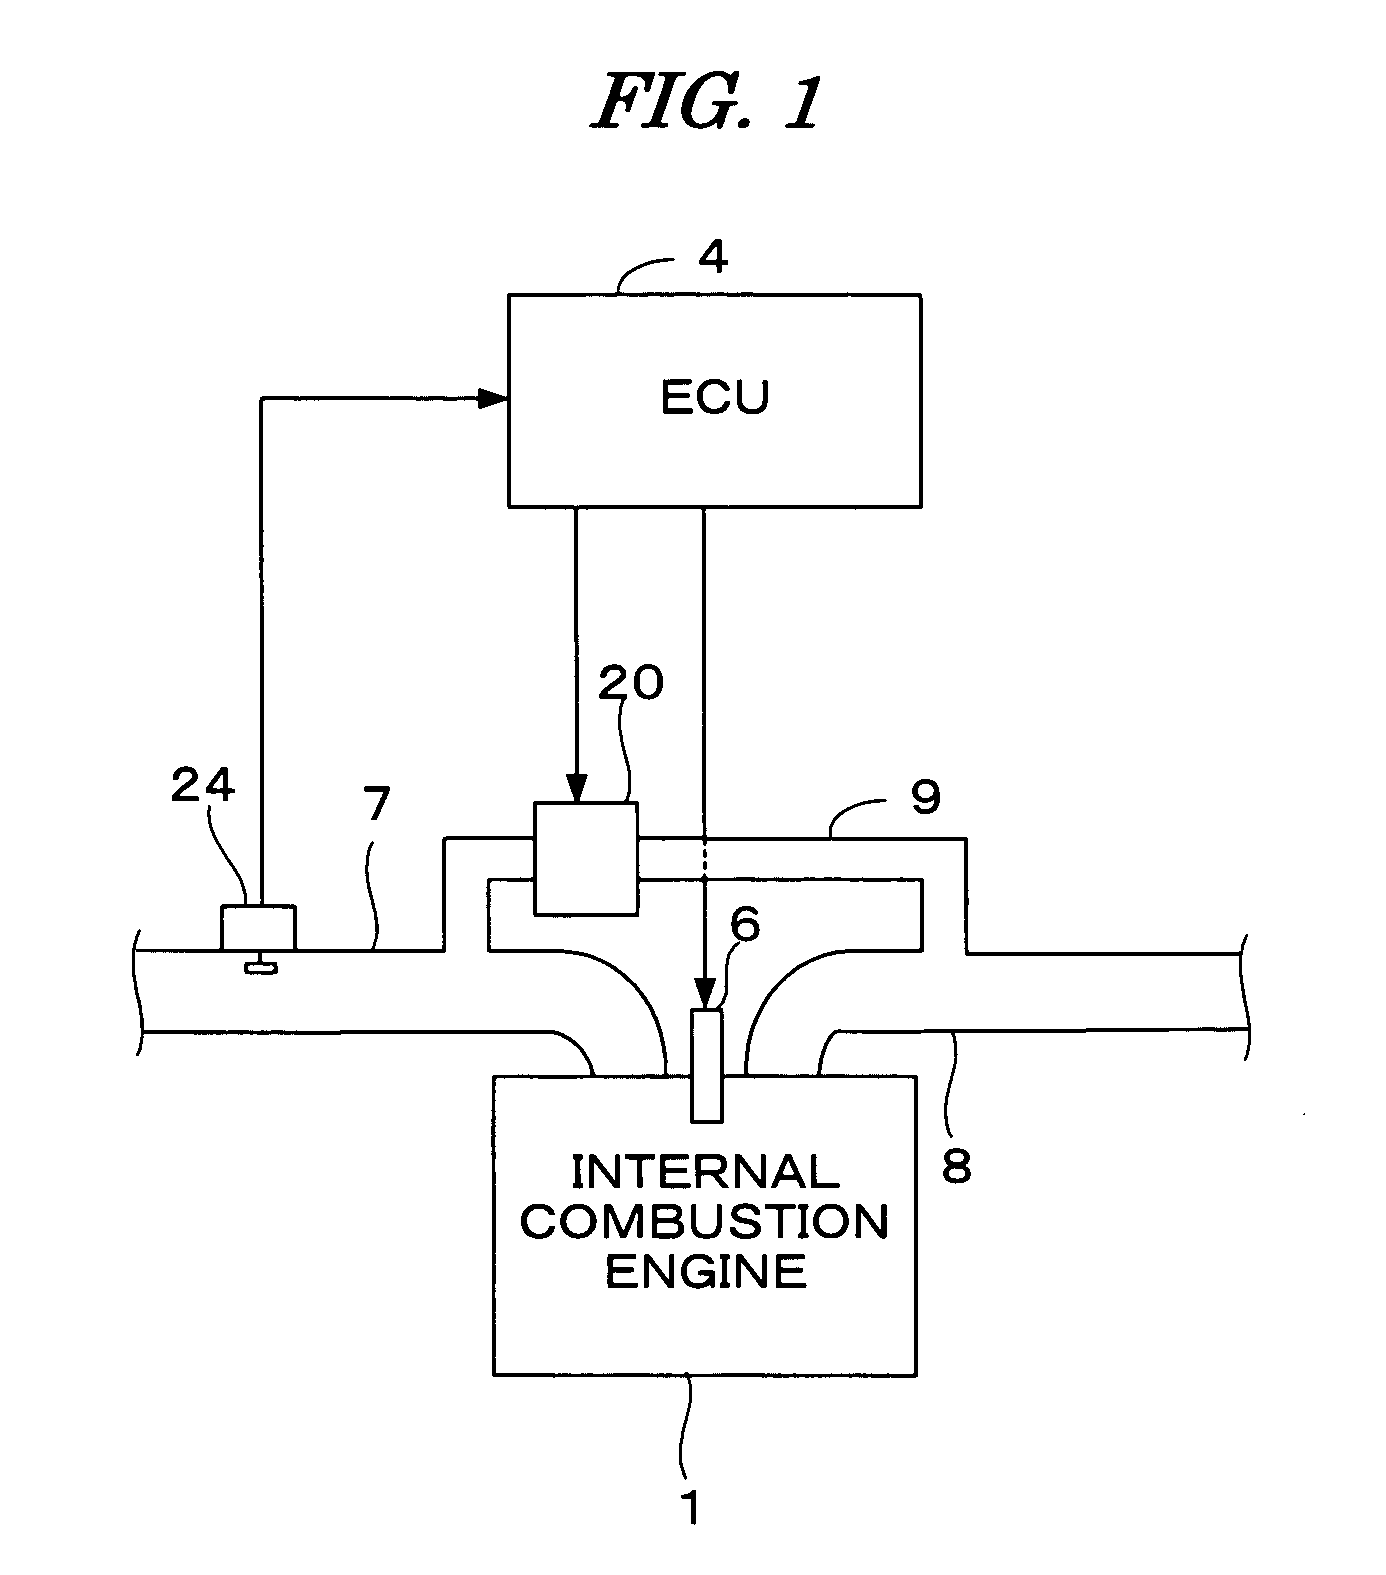 Control system for internal combustion engine